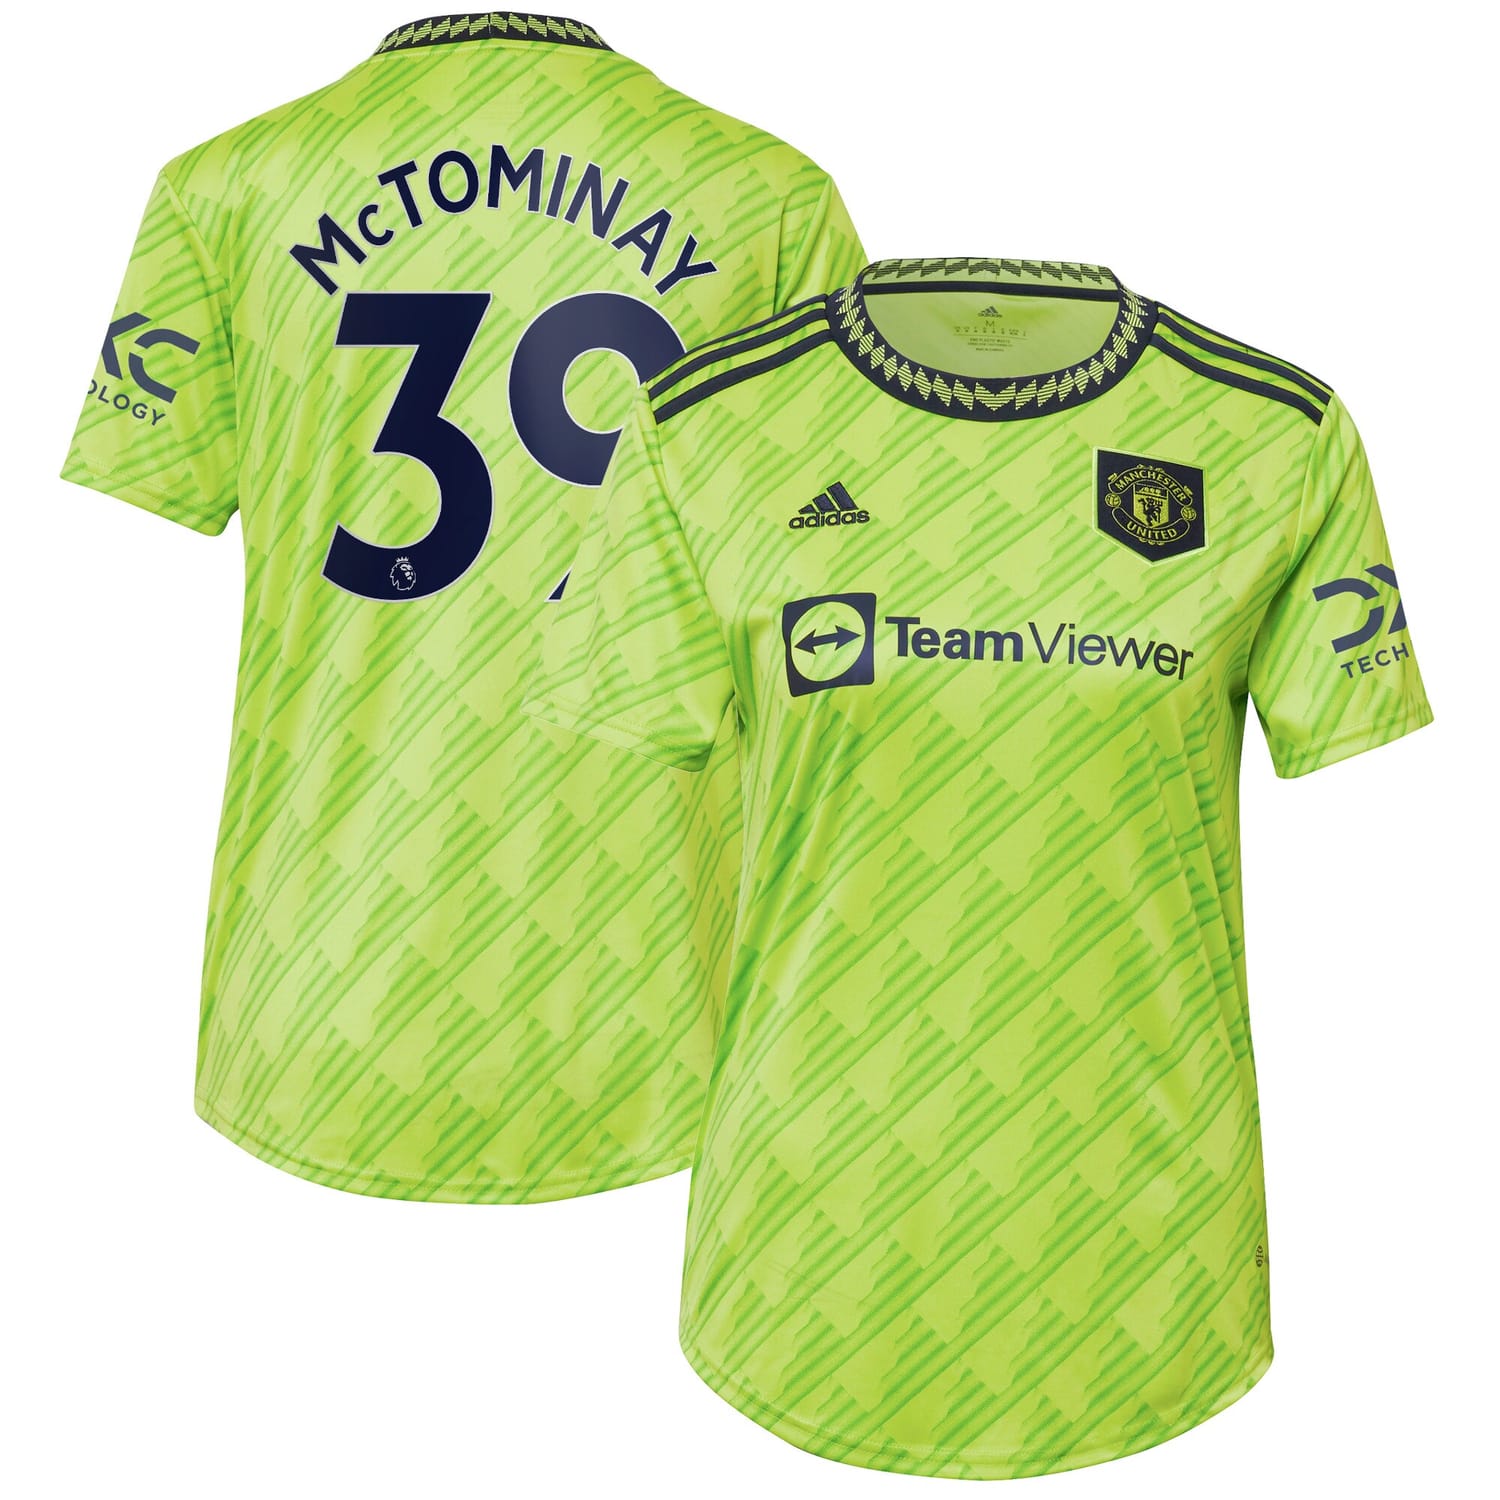 Premier League Manchester United Third Jersey Shirt Neon Green 2022-23 player Scott McTominay printing for Women